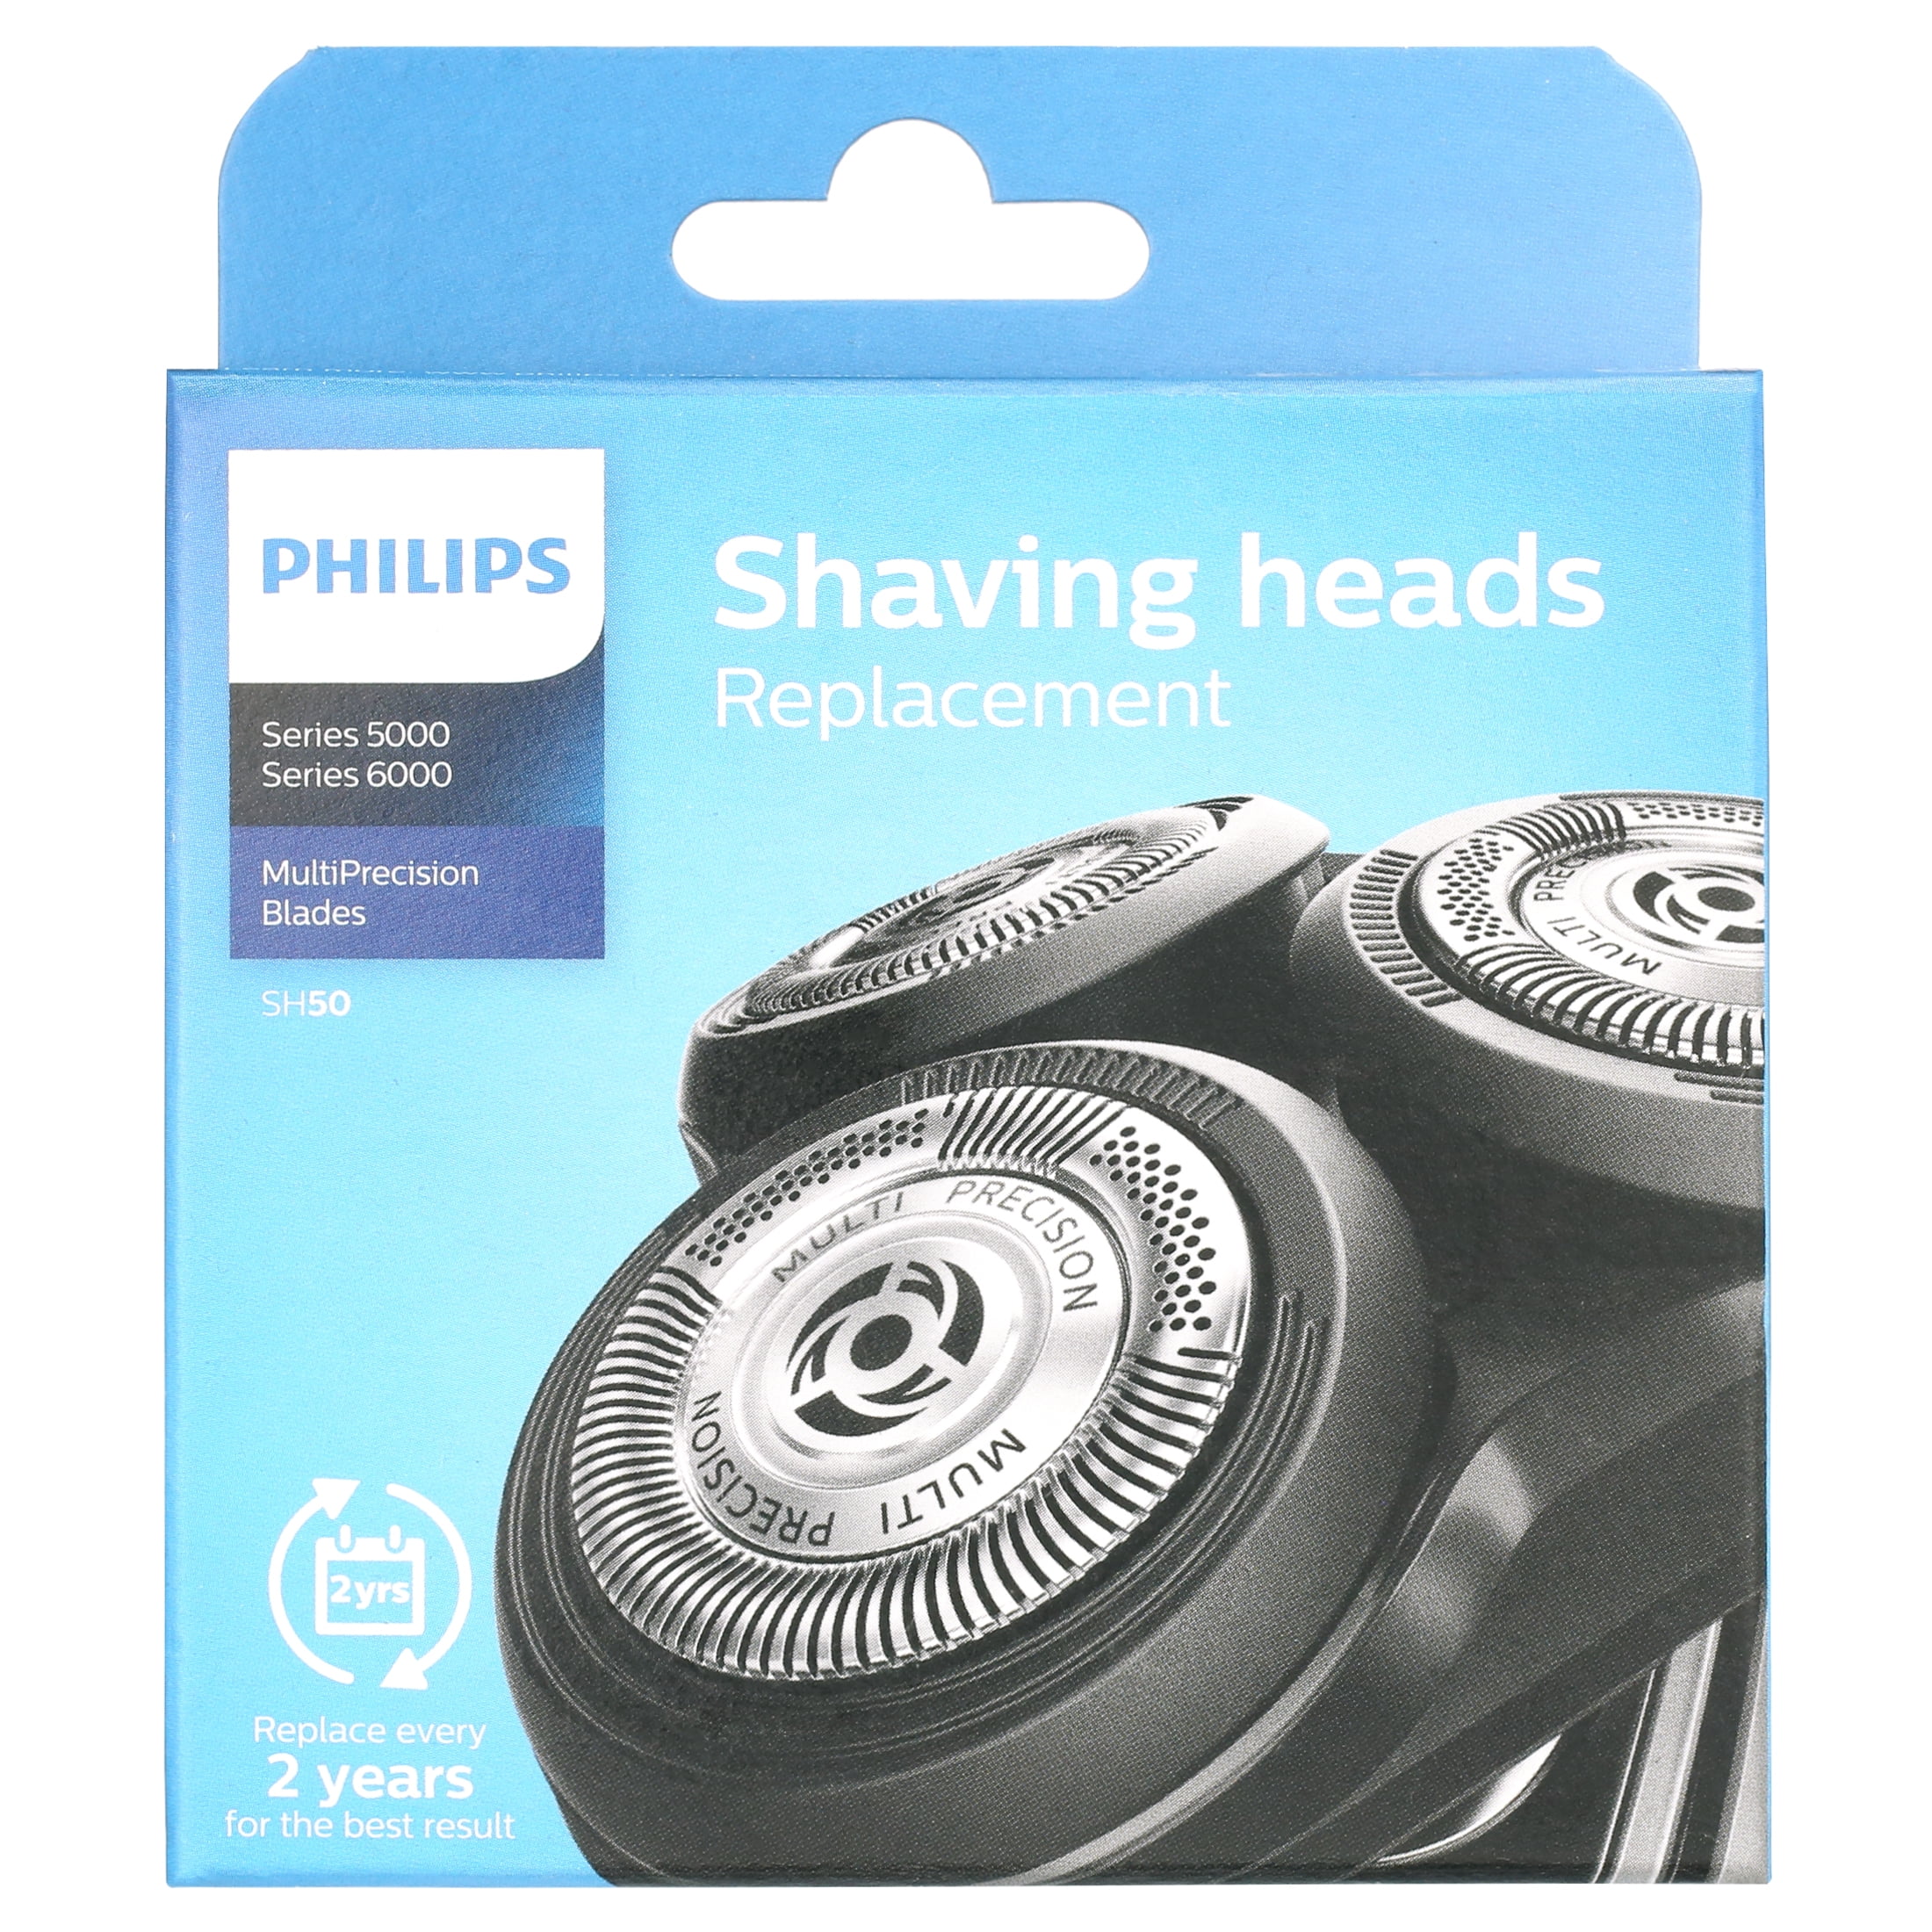 PHILIPS SH50/50 Shavers for Series Replacement 5000 Blades Electric